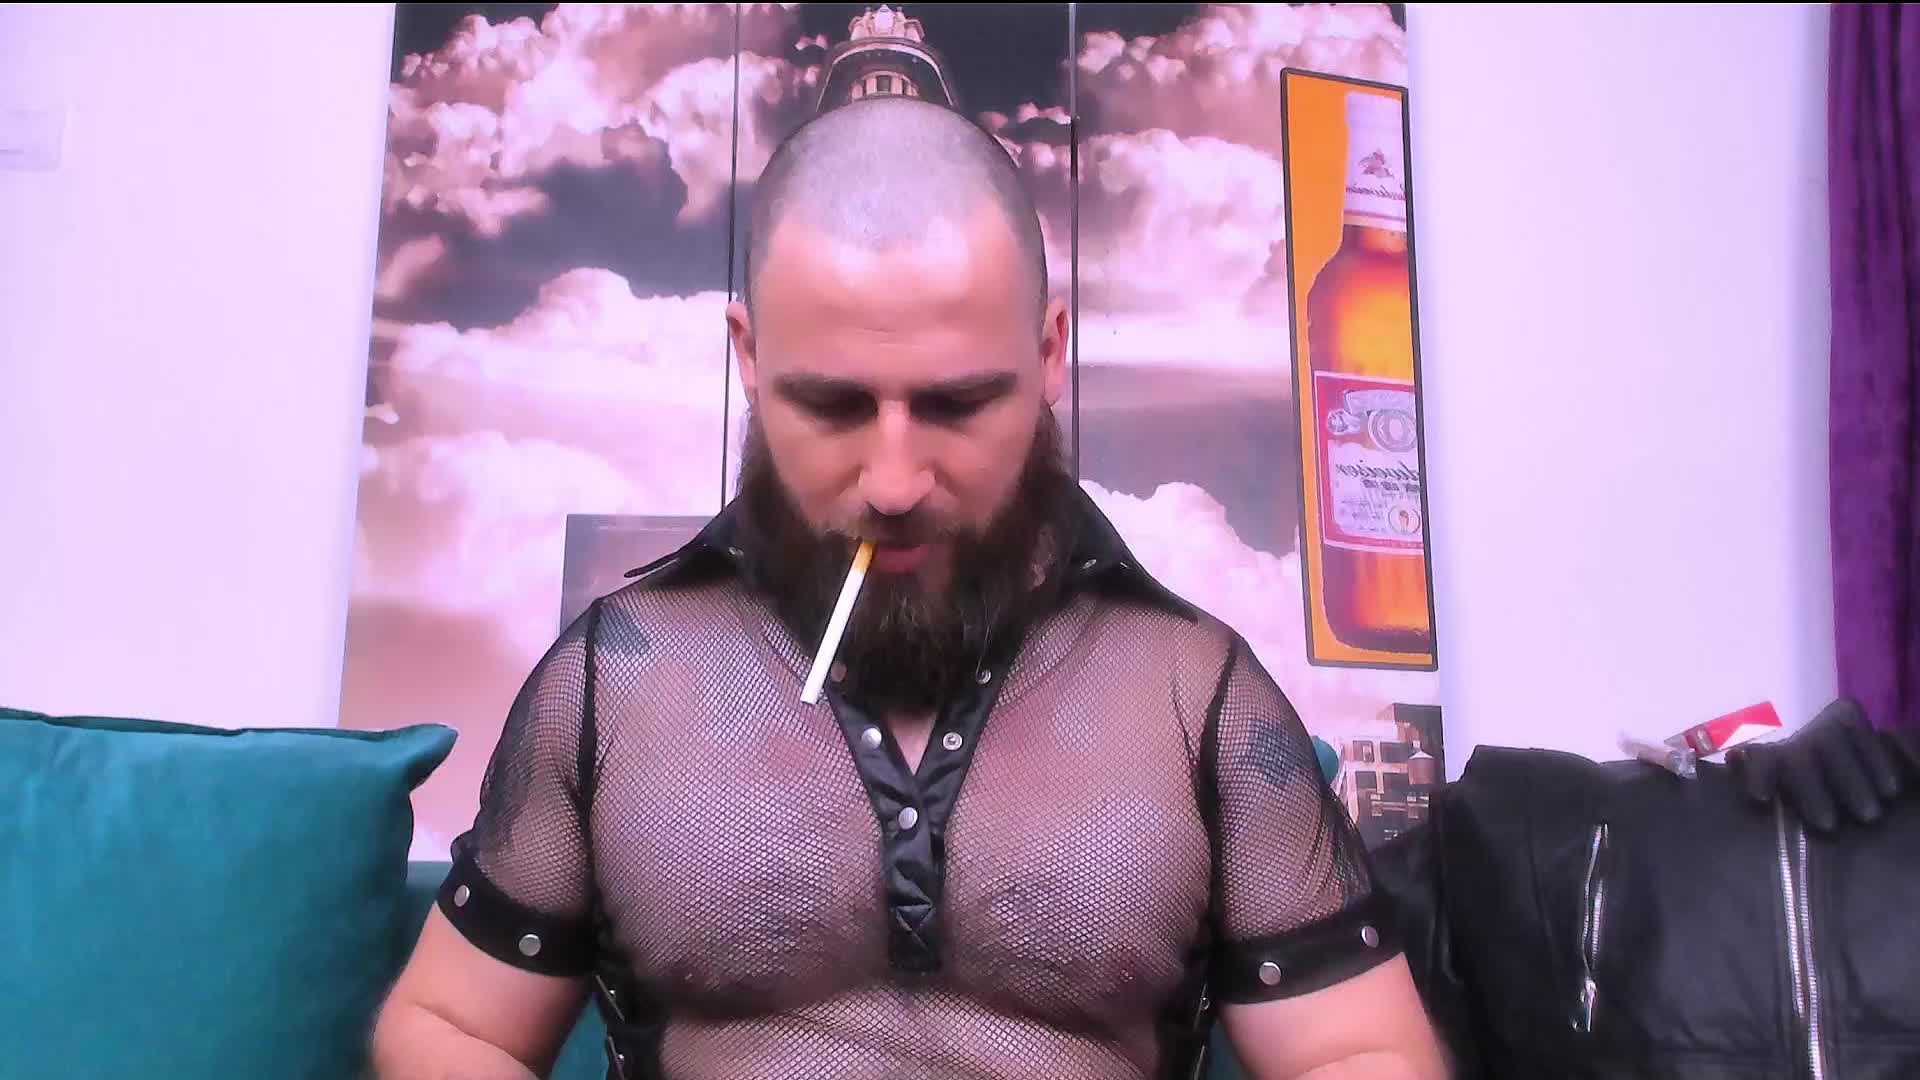 Spraying a BIG CUM SHOT and smoking cigarette at the end ( Thank you Jim)